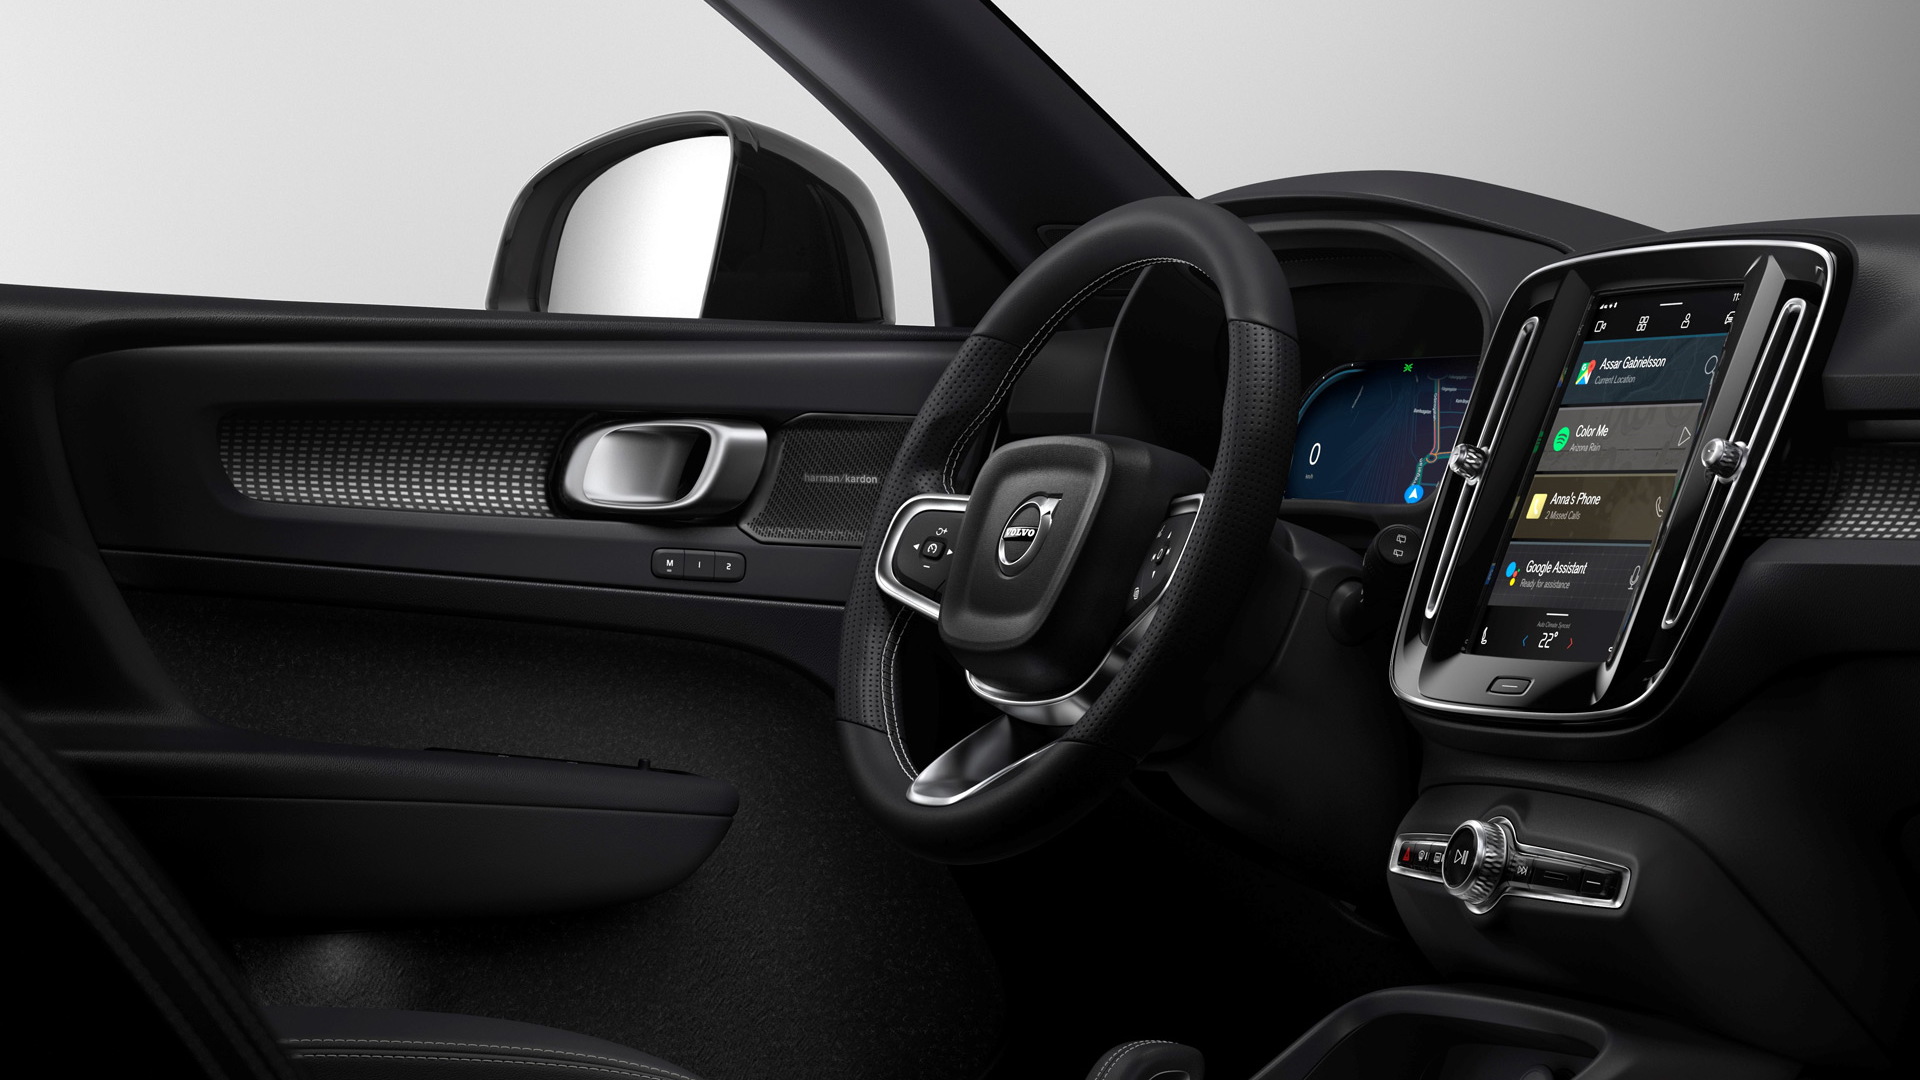 Volvo XC40 Electric Interior Revealed, Infotainment Runs on Android